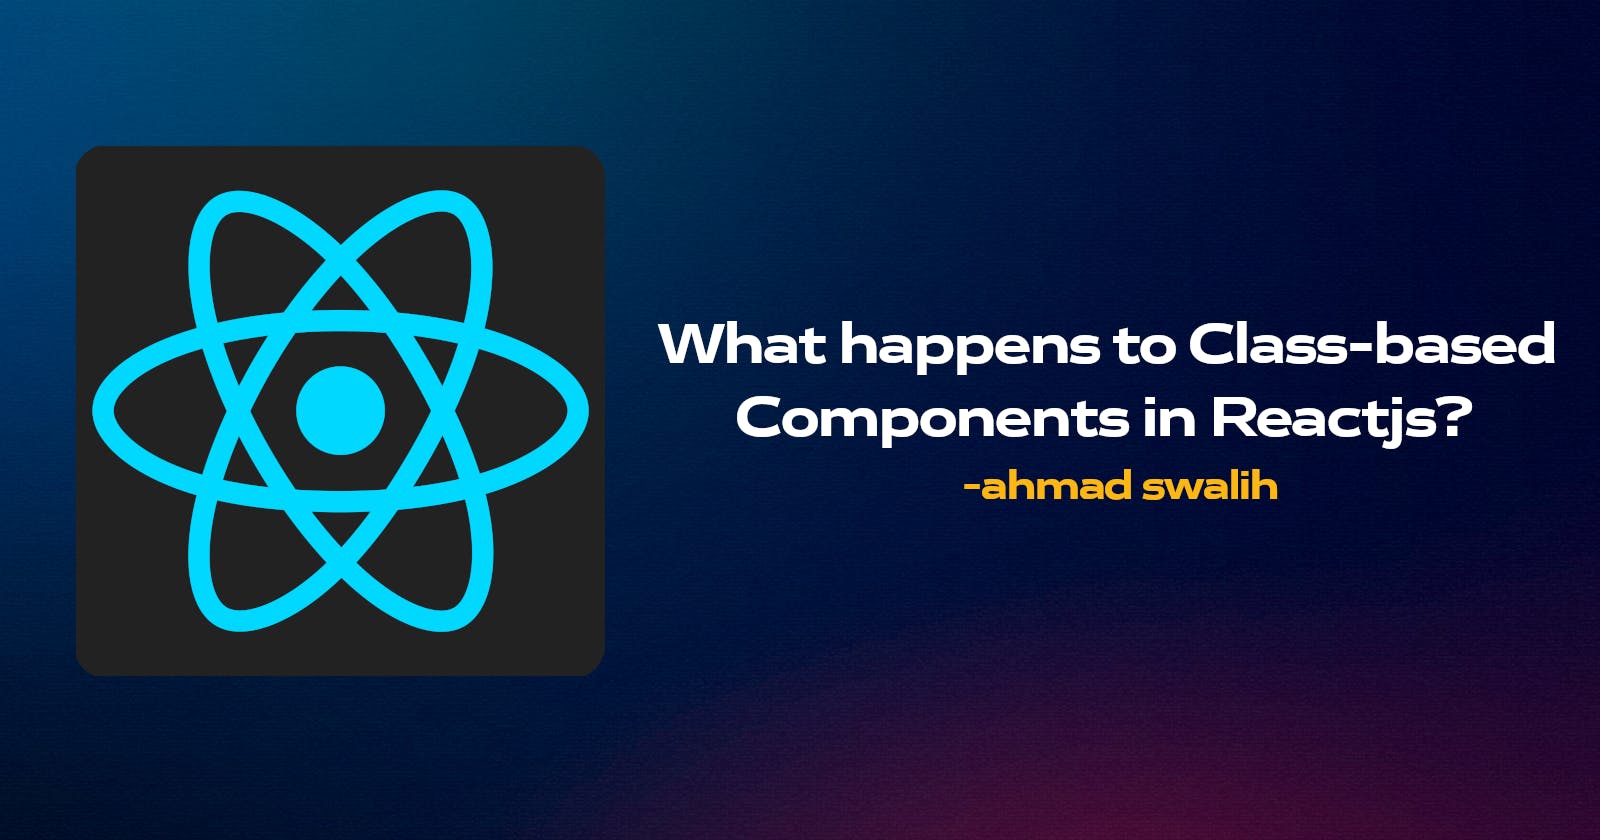 What happens to Class-based Components in Reactjs?